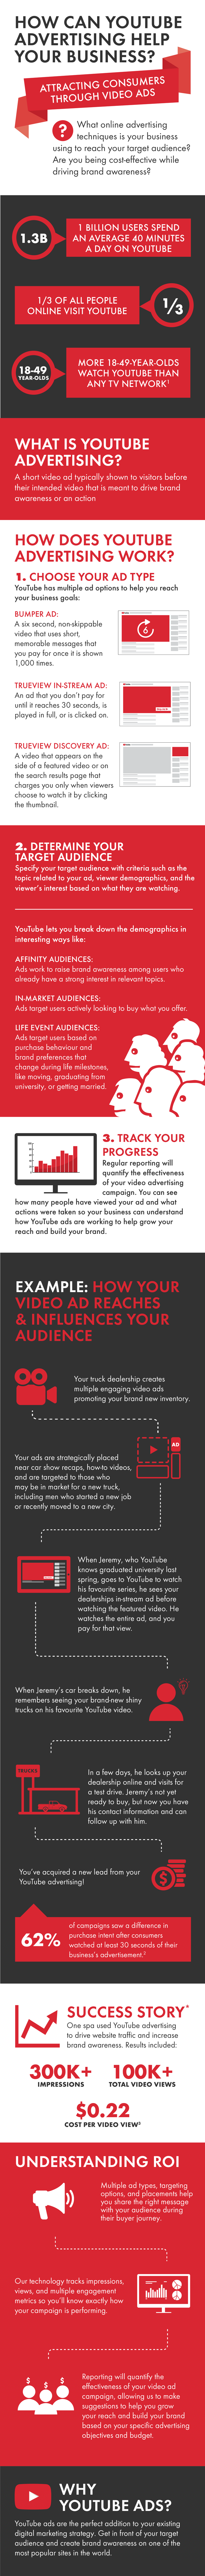 How Can YouTube Advertising Help Your Business?